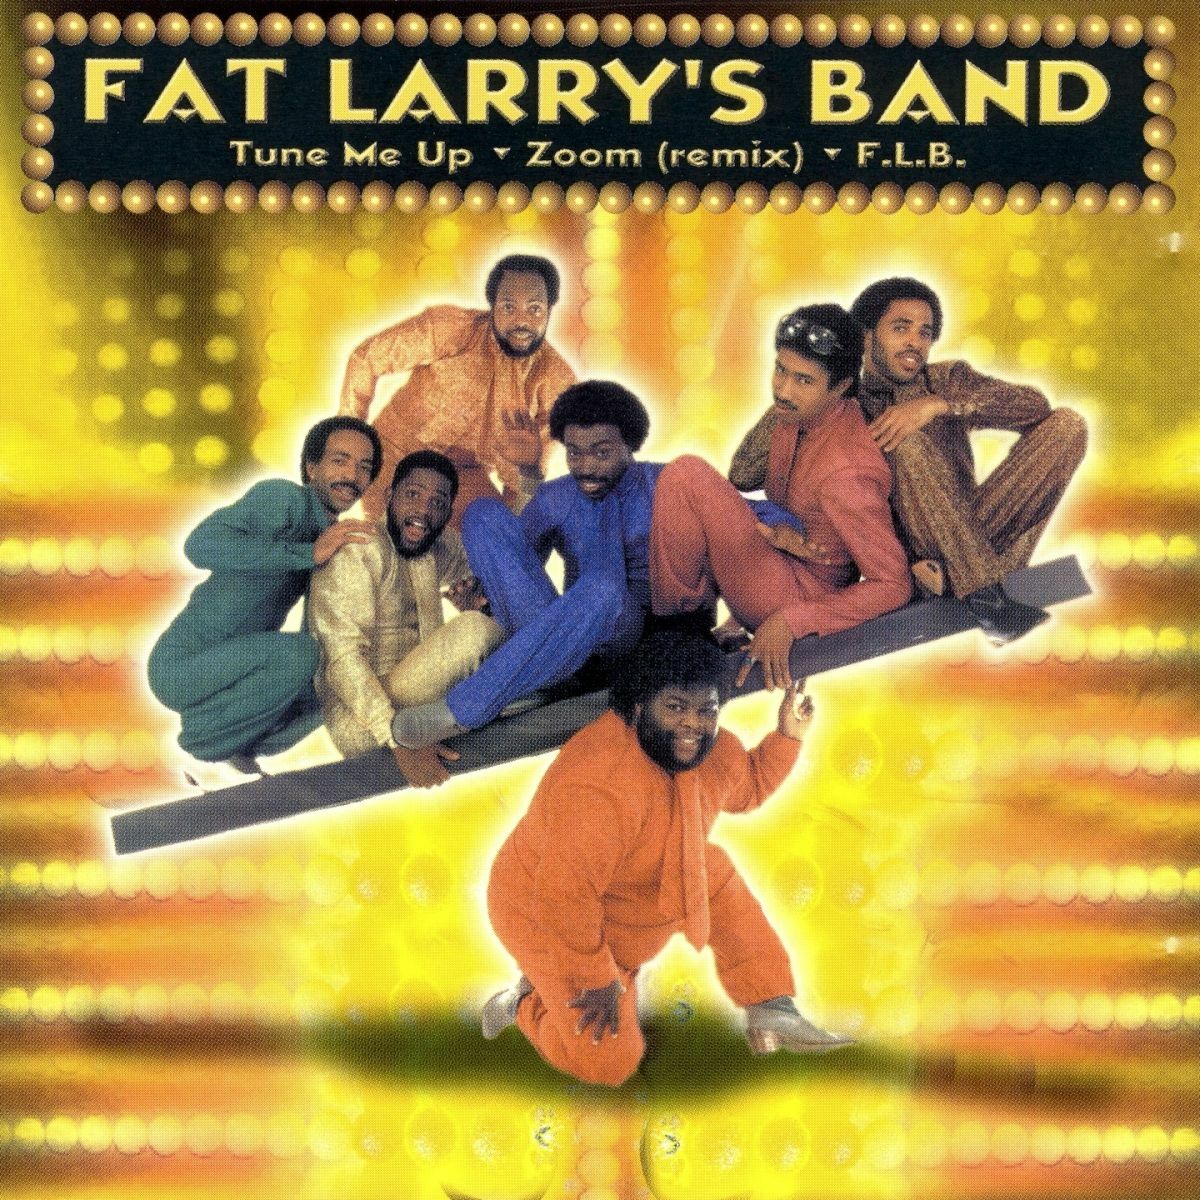 Fat Larry's Band: albums, songs, playlists | Listen on Deezer